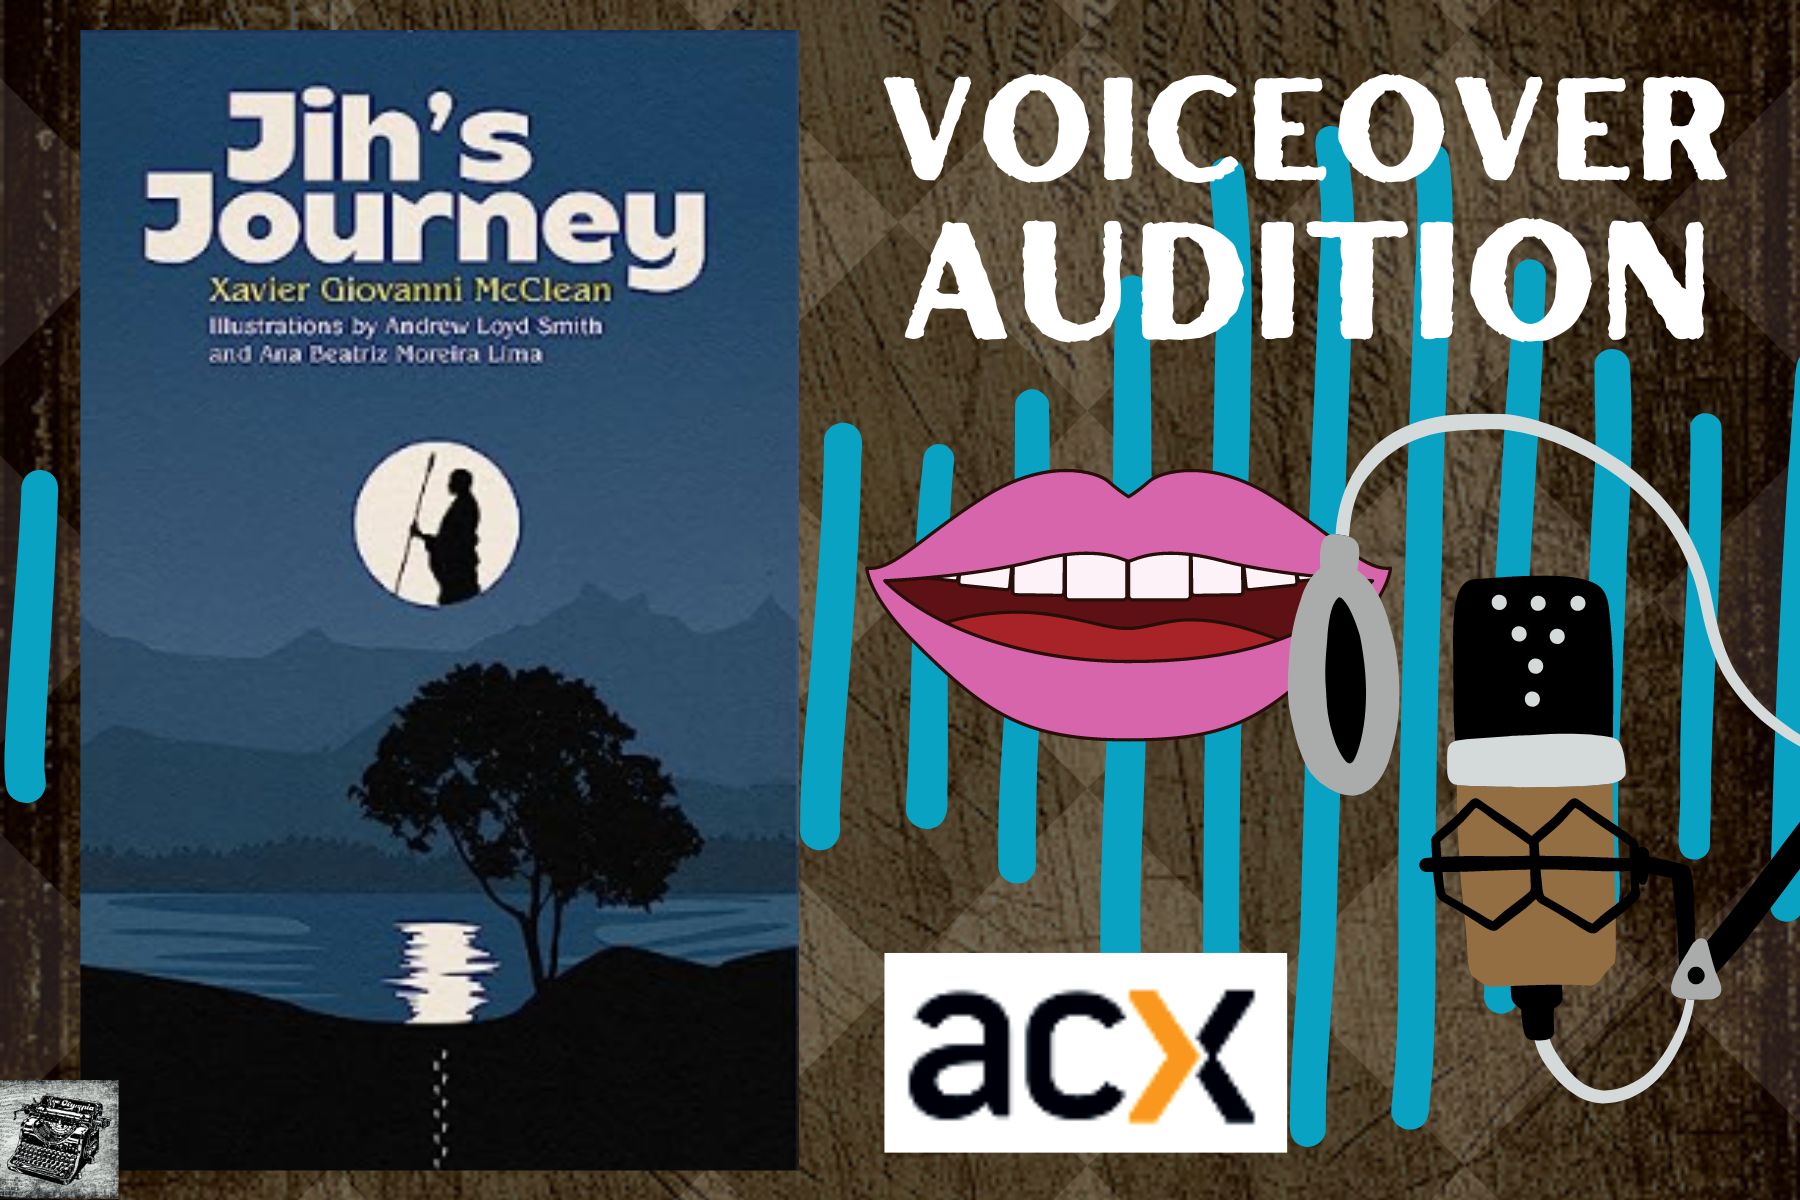  ACX Voiceover Audio Audition and Transcript for Jih’s Journey